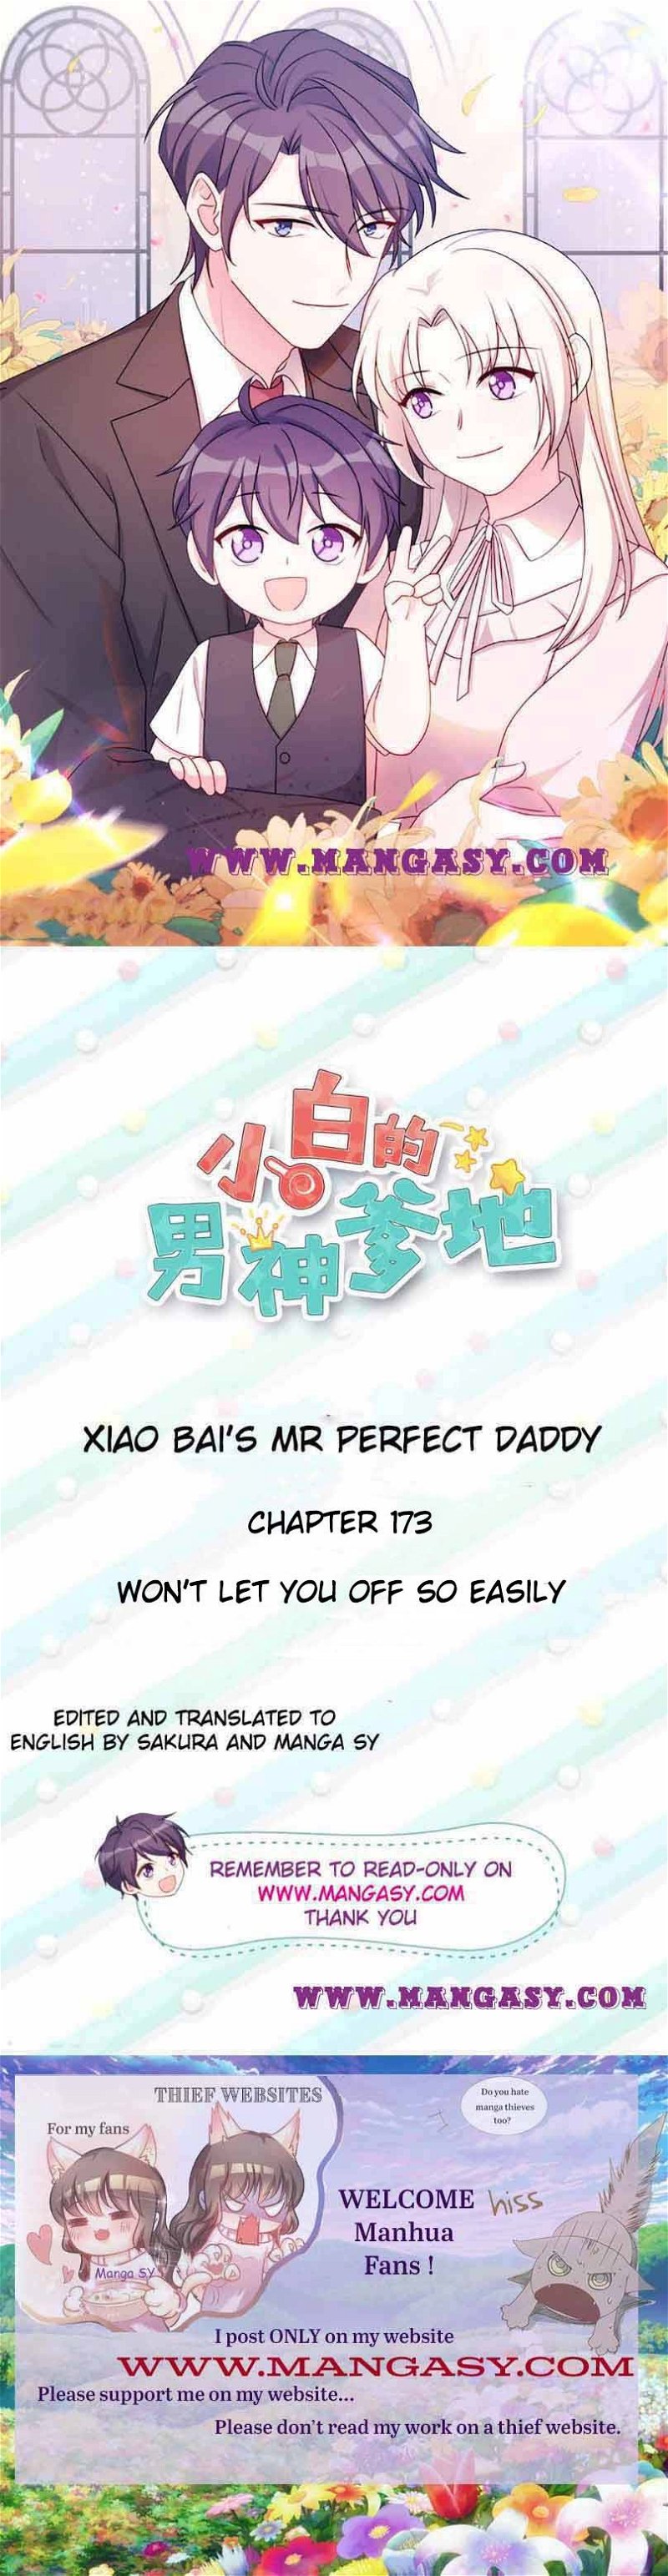 Xiao Bai’s father is a wonderful person Chapter 173 - Page 0